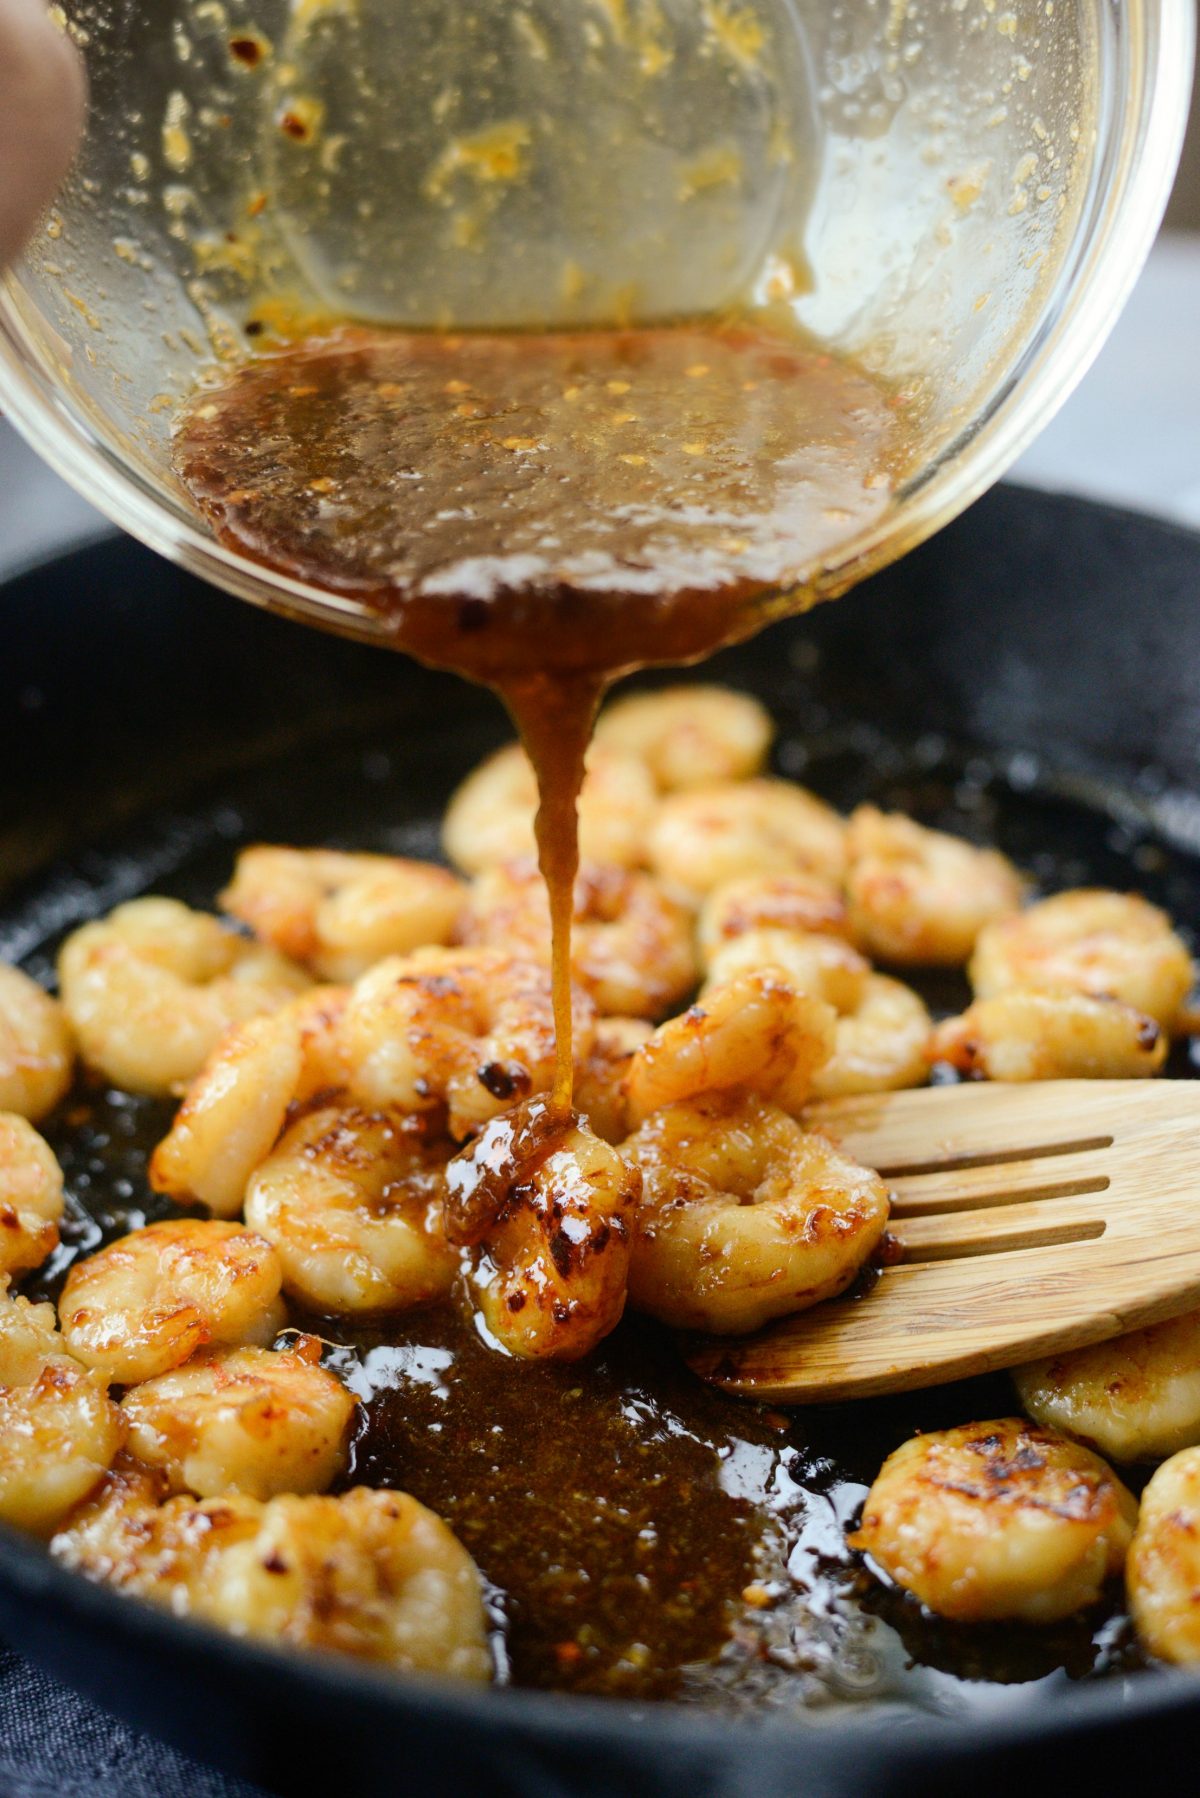 pour in half of the remaining sauce over cooked shrimp